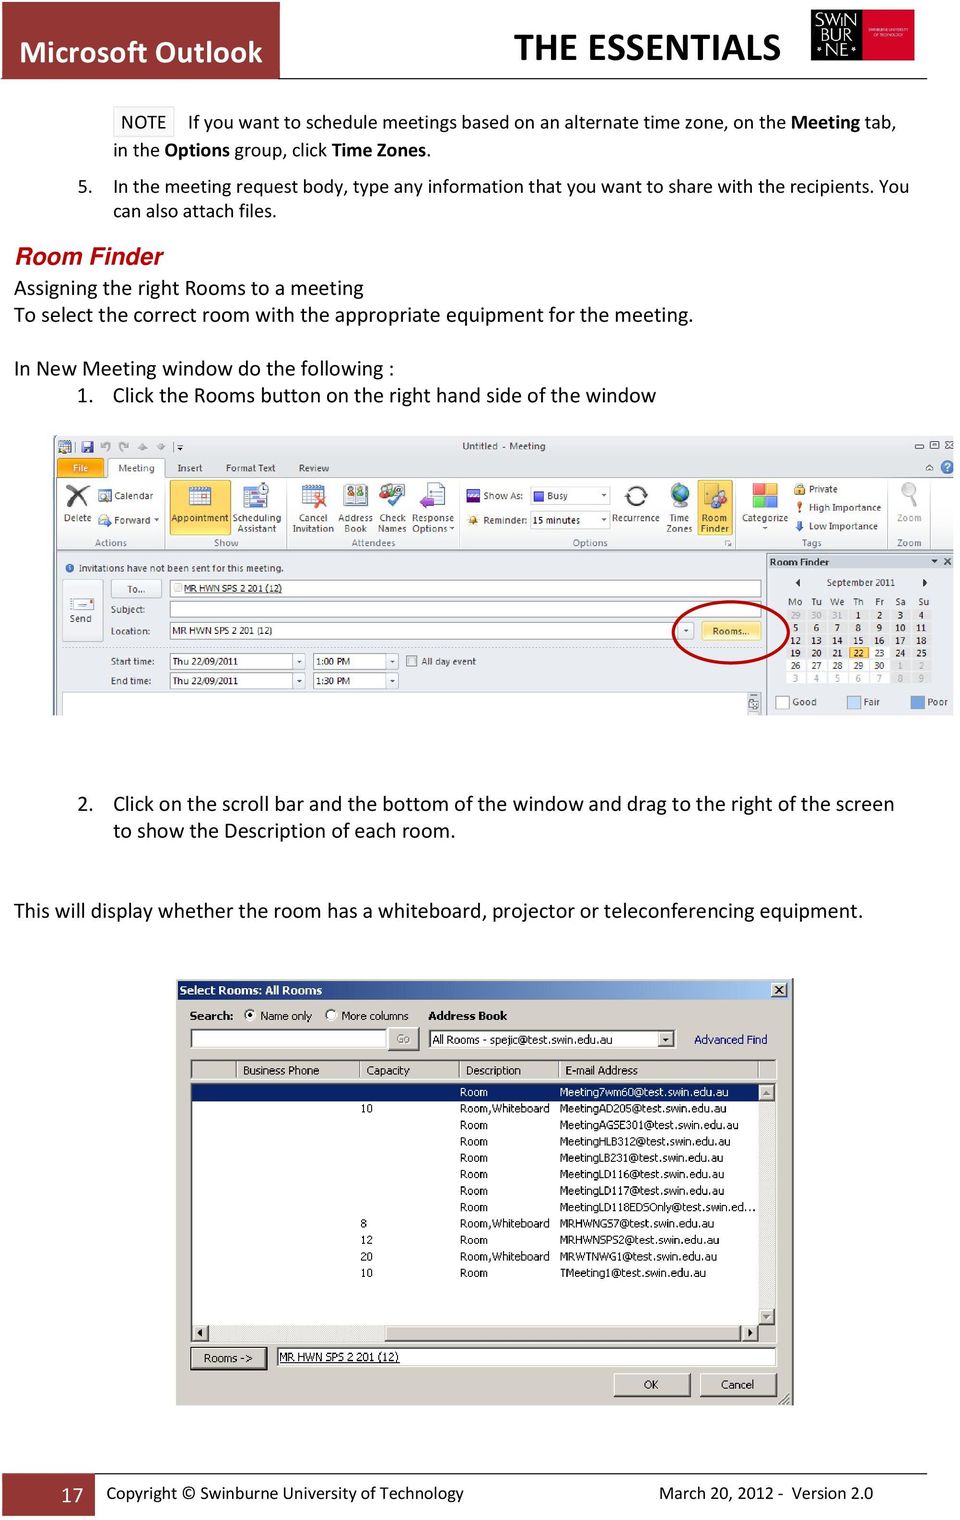 Room Finder Assigning the right Rooms to a meeting To select the correct room with the appropriate equipment for the meeting. In New Meeting window do the following : 1.